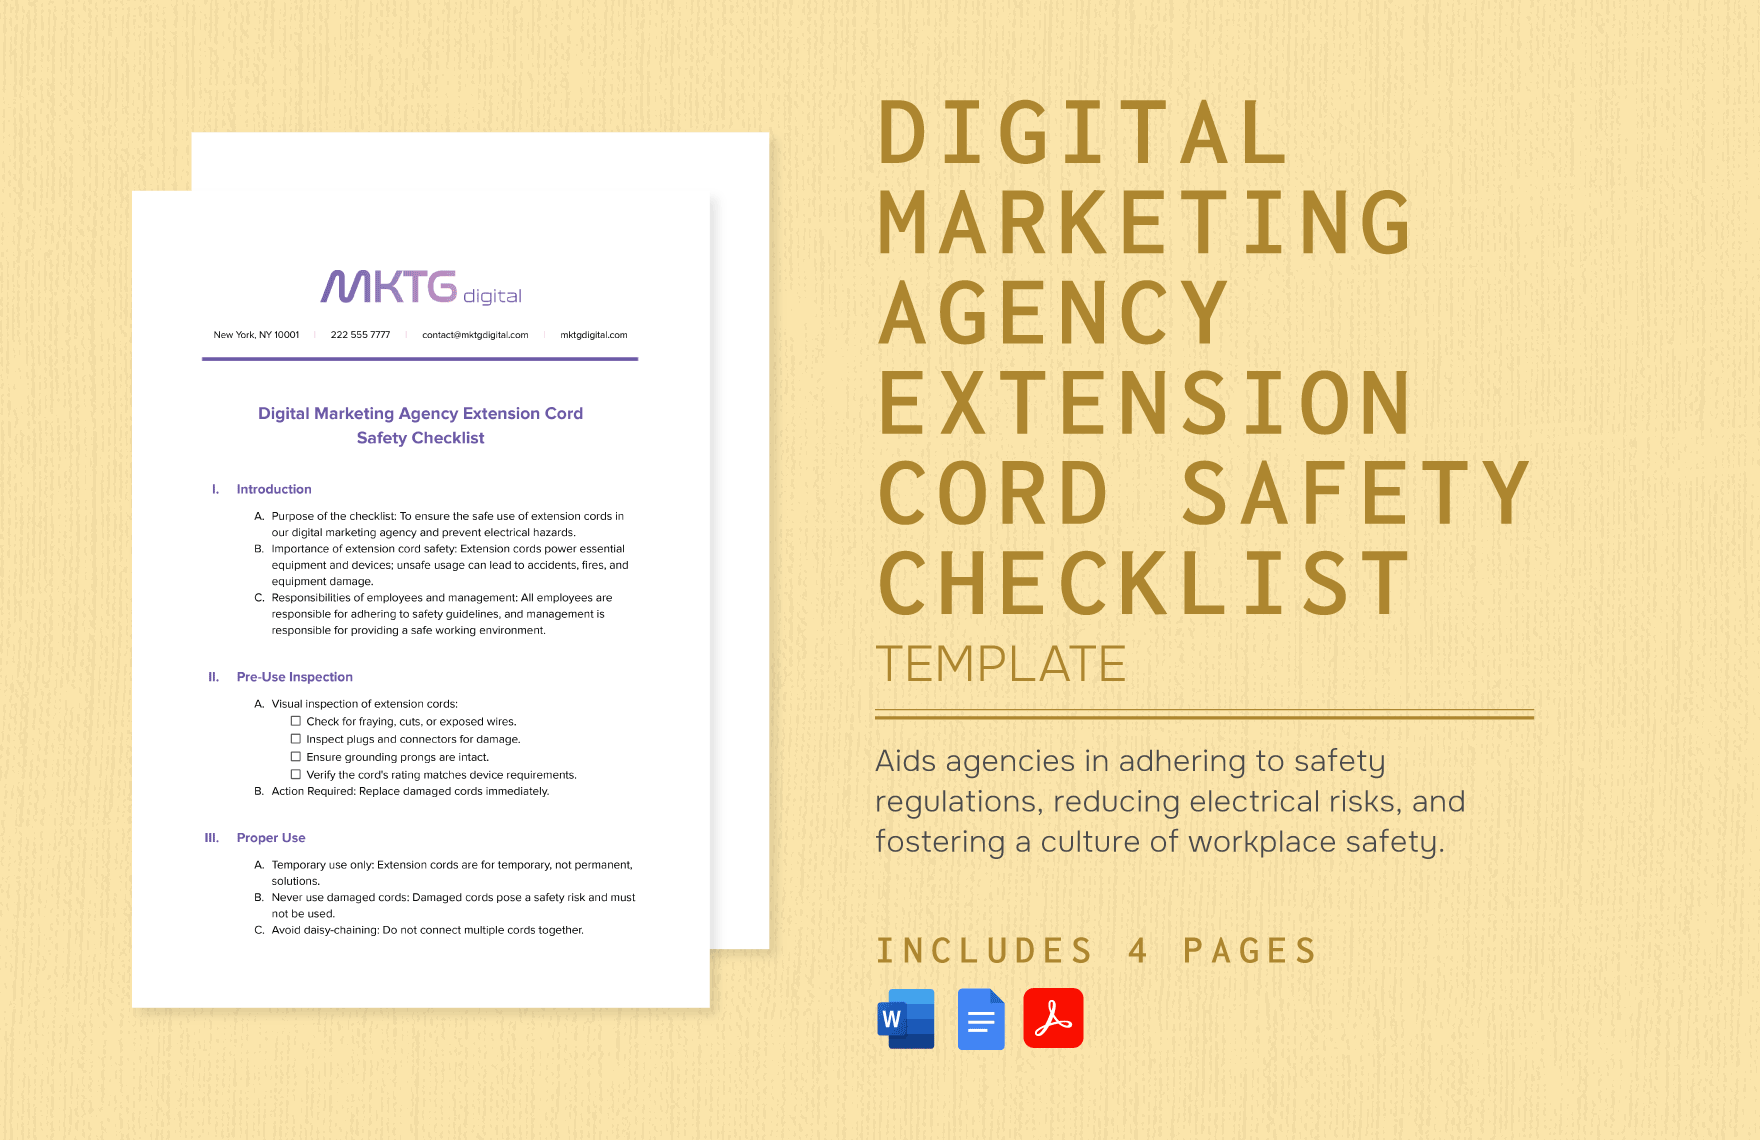 Digital Marketing Agency Extension Cord Safety Checklist Template